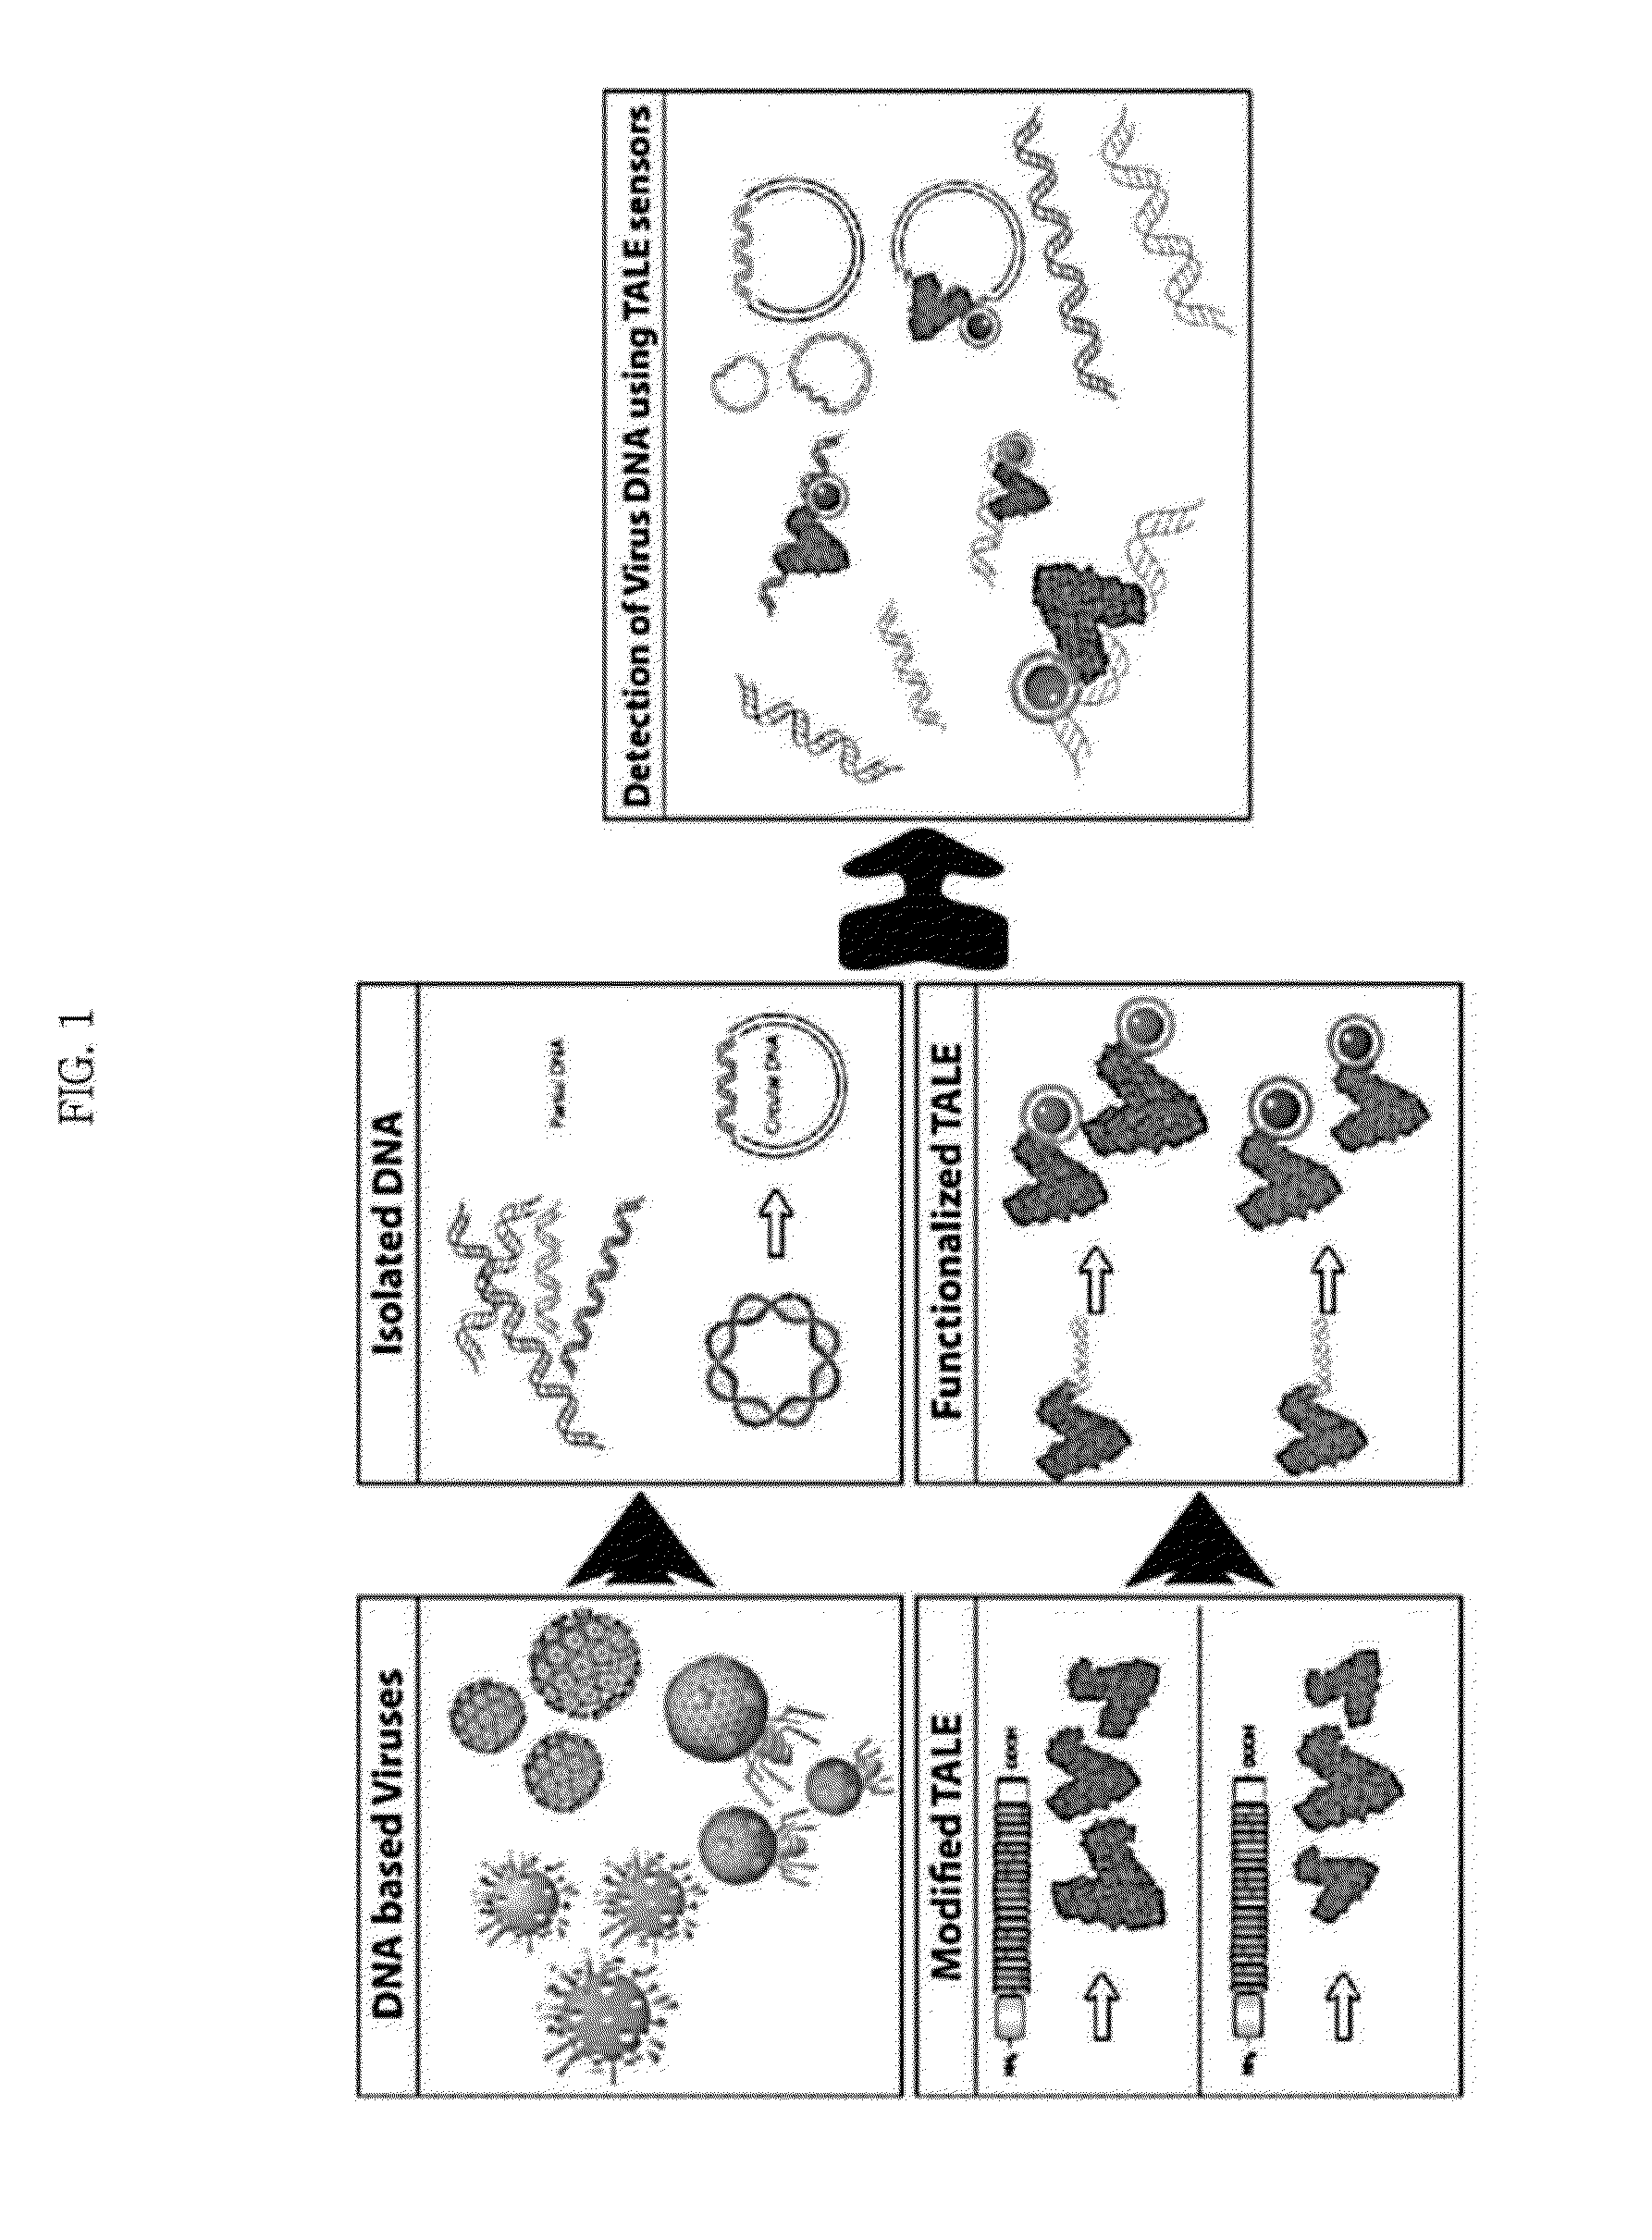 Composition for detection or diagnosis of diseases containing transcription activator-like effector